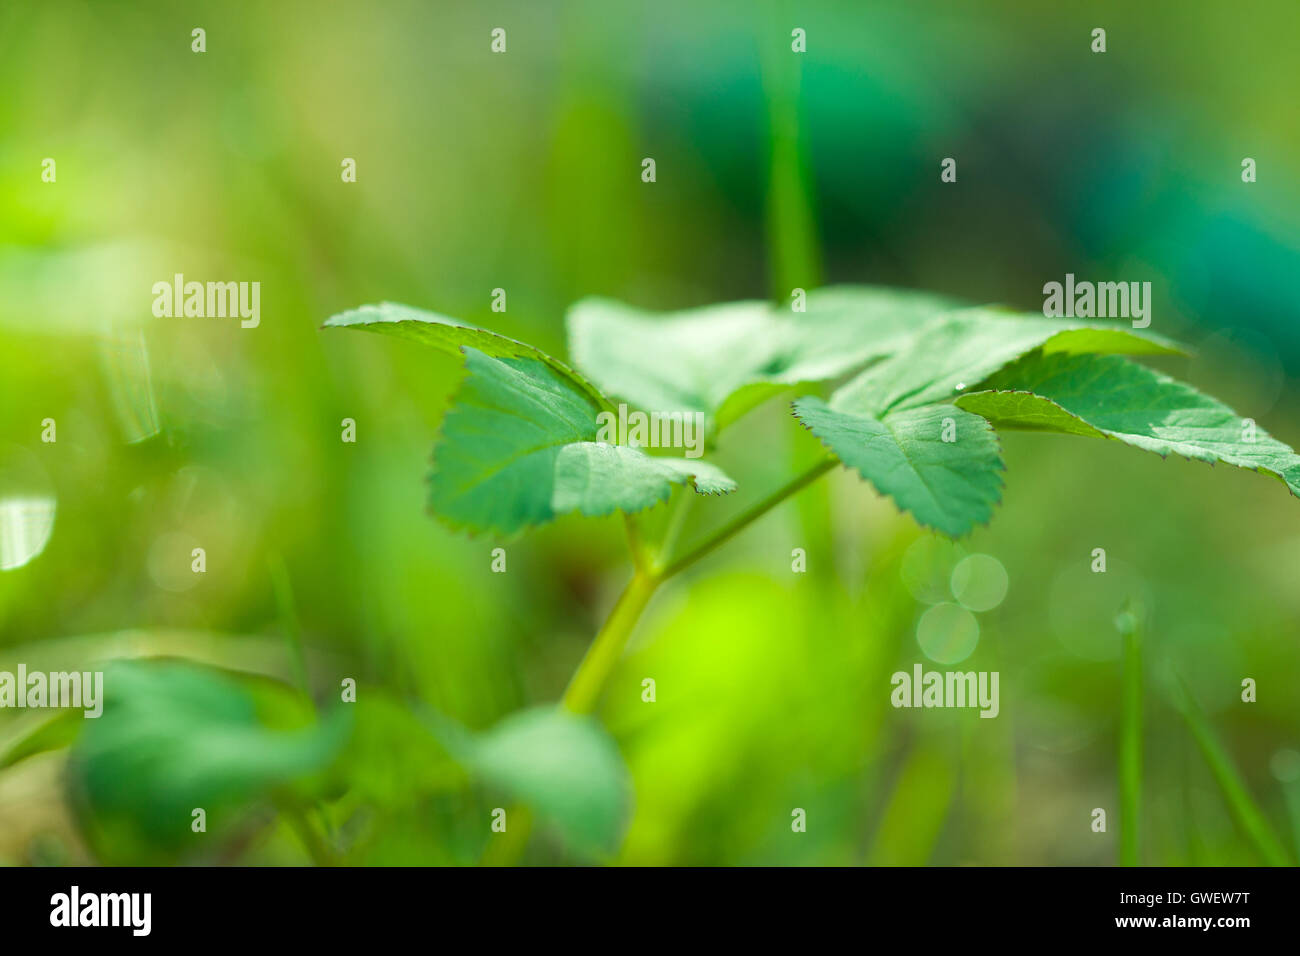 Botanic ecological nature image: young fresh partially defocused spring plant closeup against blurred green eco background. Stock Photo